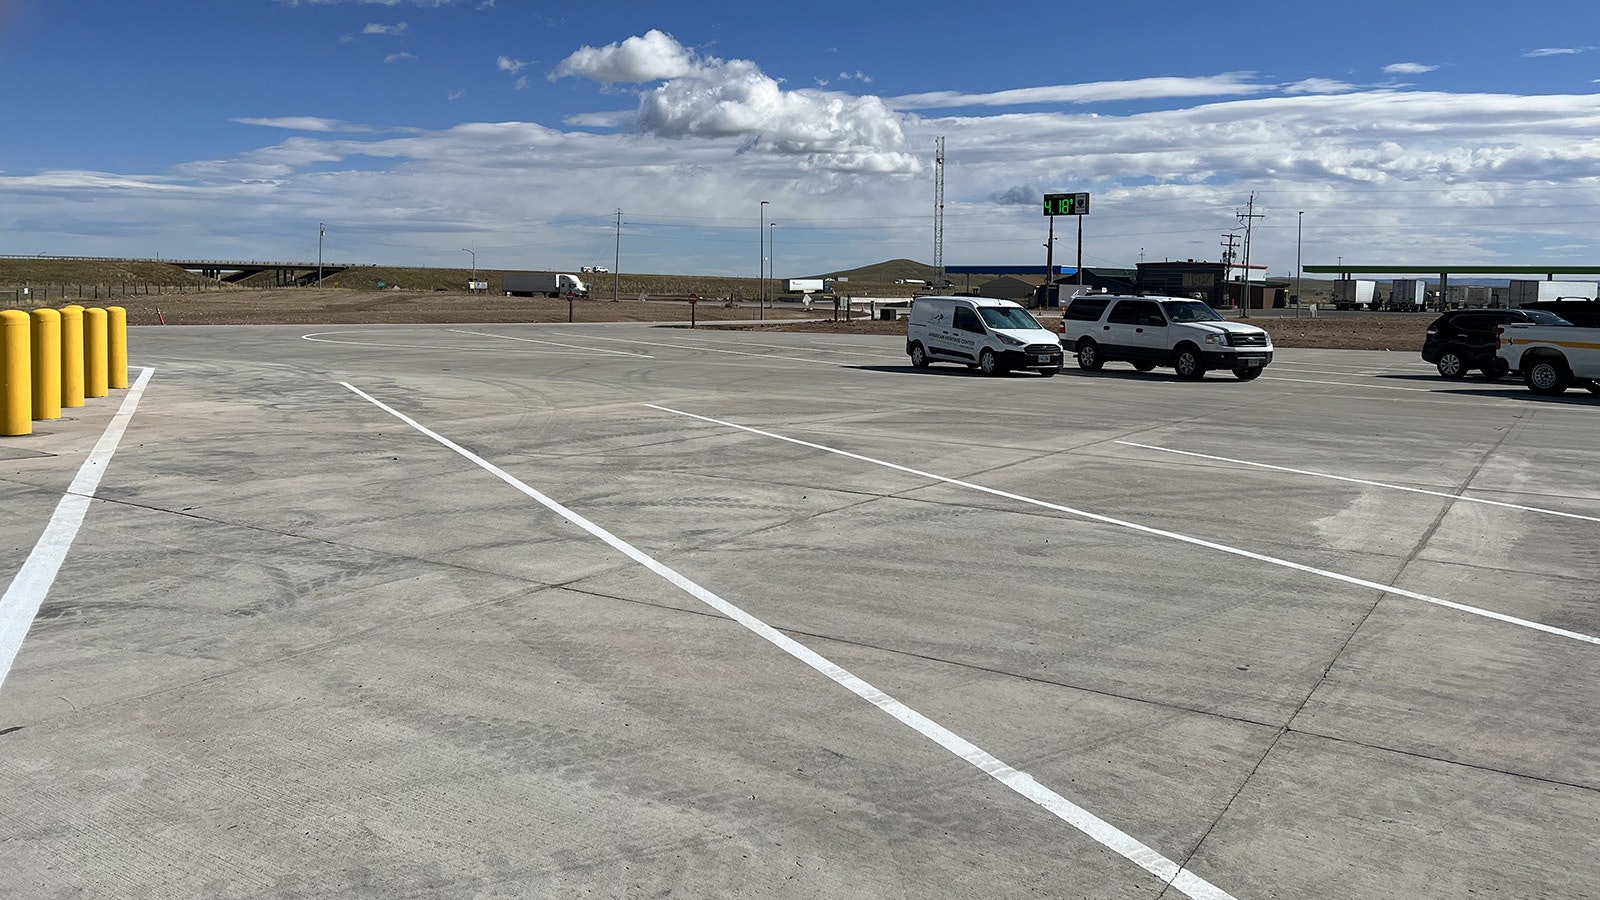 The truck stop at Quealy Dome along Interstate 80 west of Laramie is expected to get busier, with the opening of a massive new parking lot for semi-trucks, which will give truckers somewhere to go during winter storms.